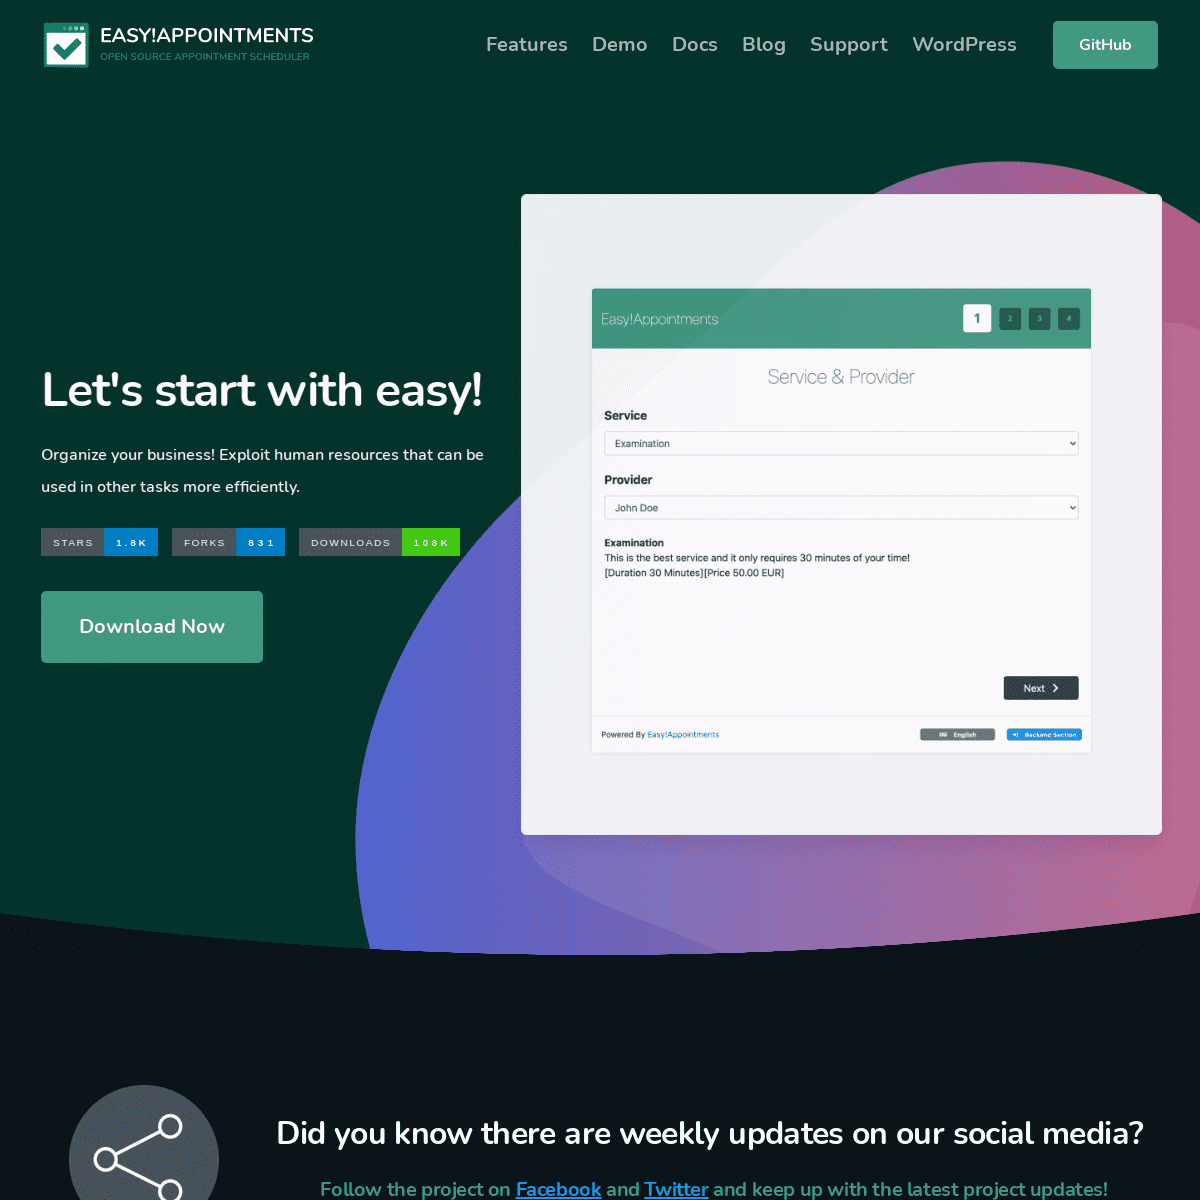 A complete backup of https://easyappointments.org